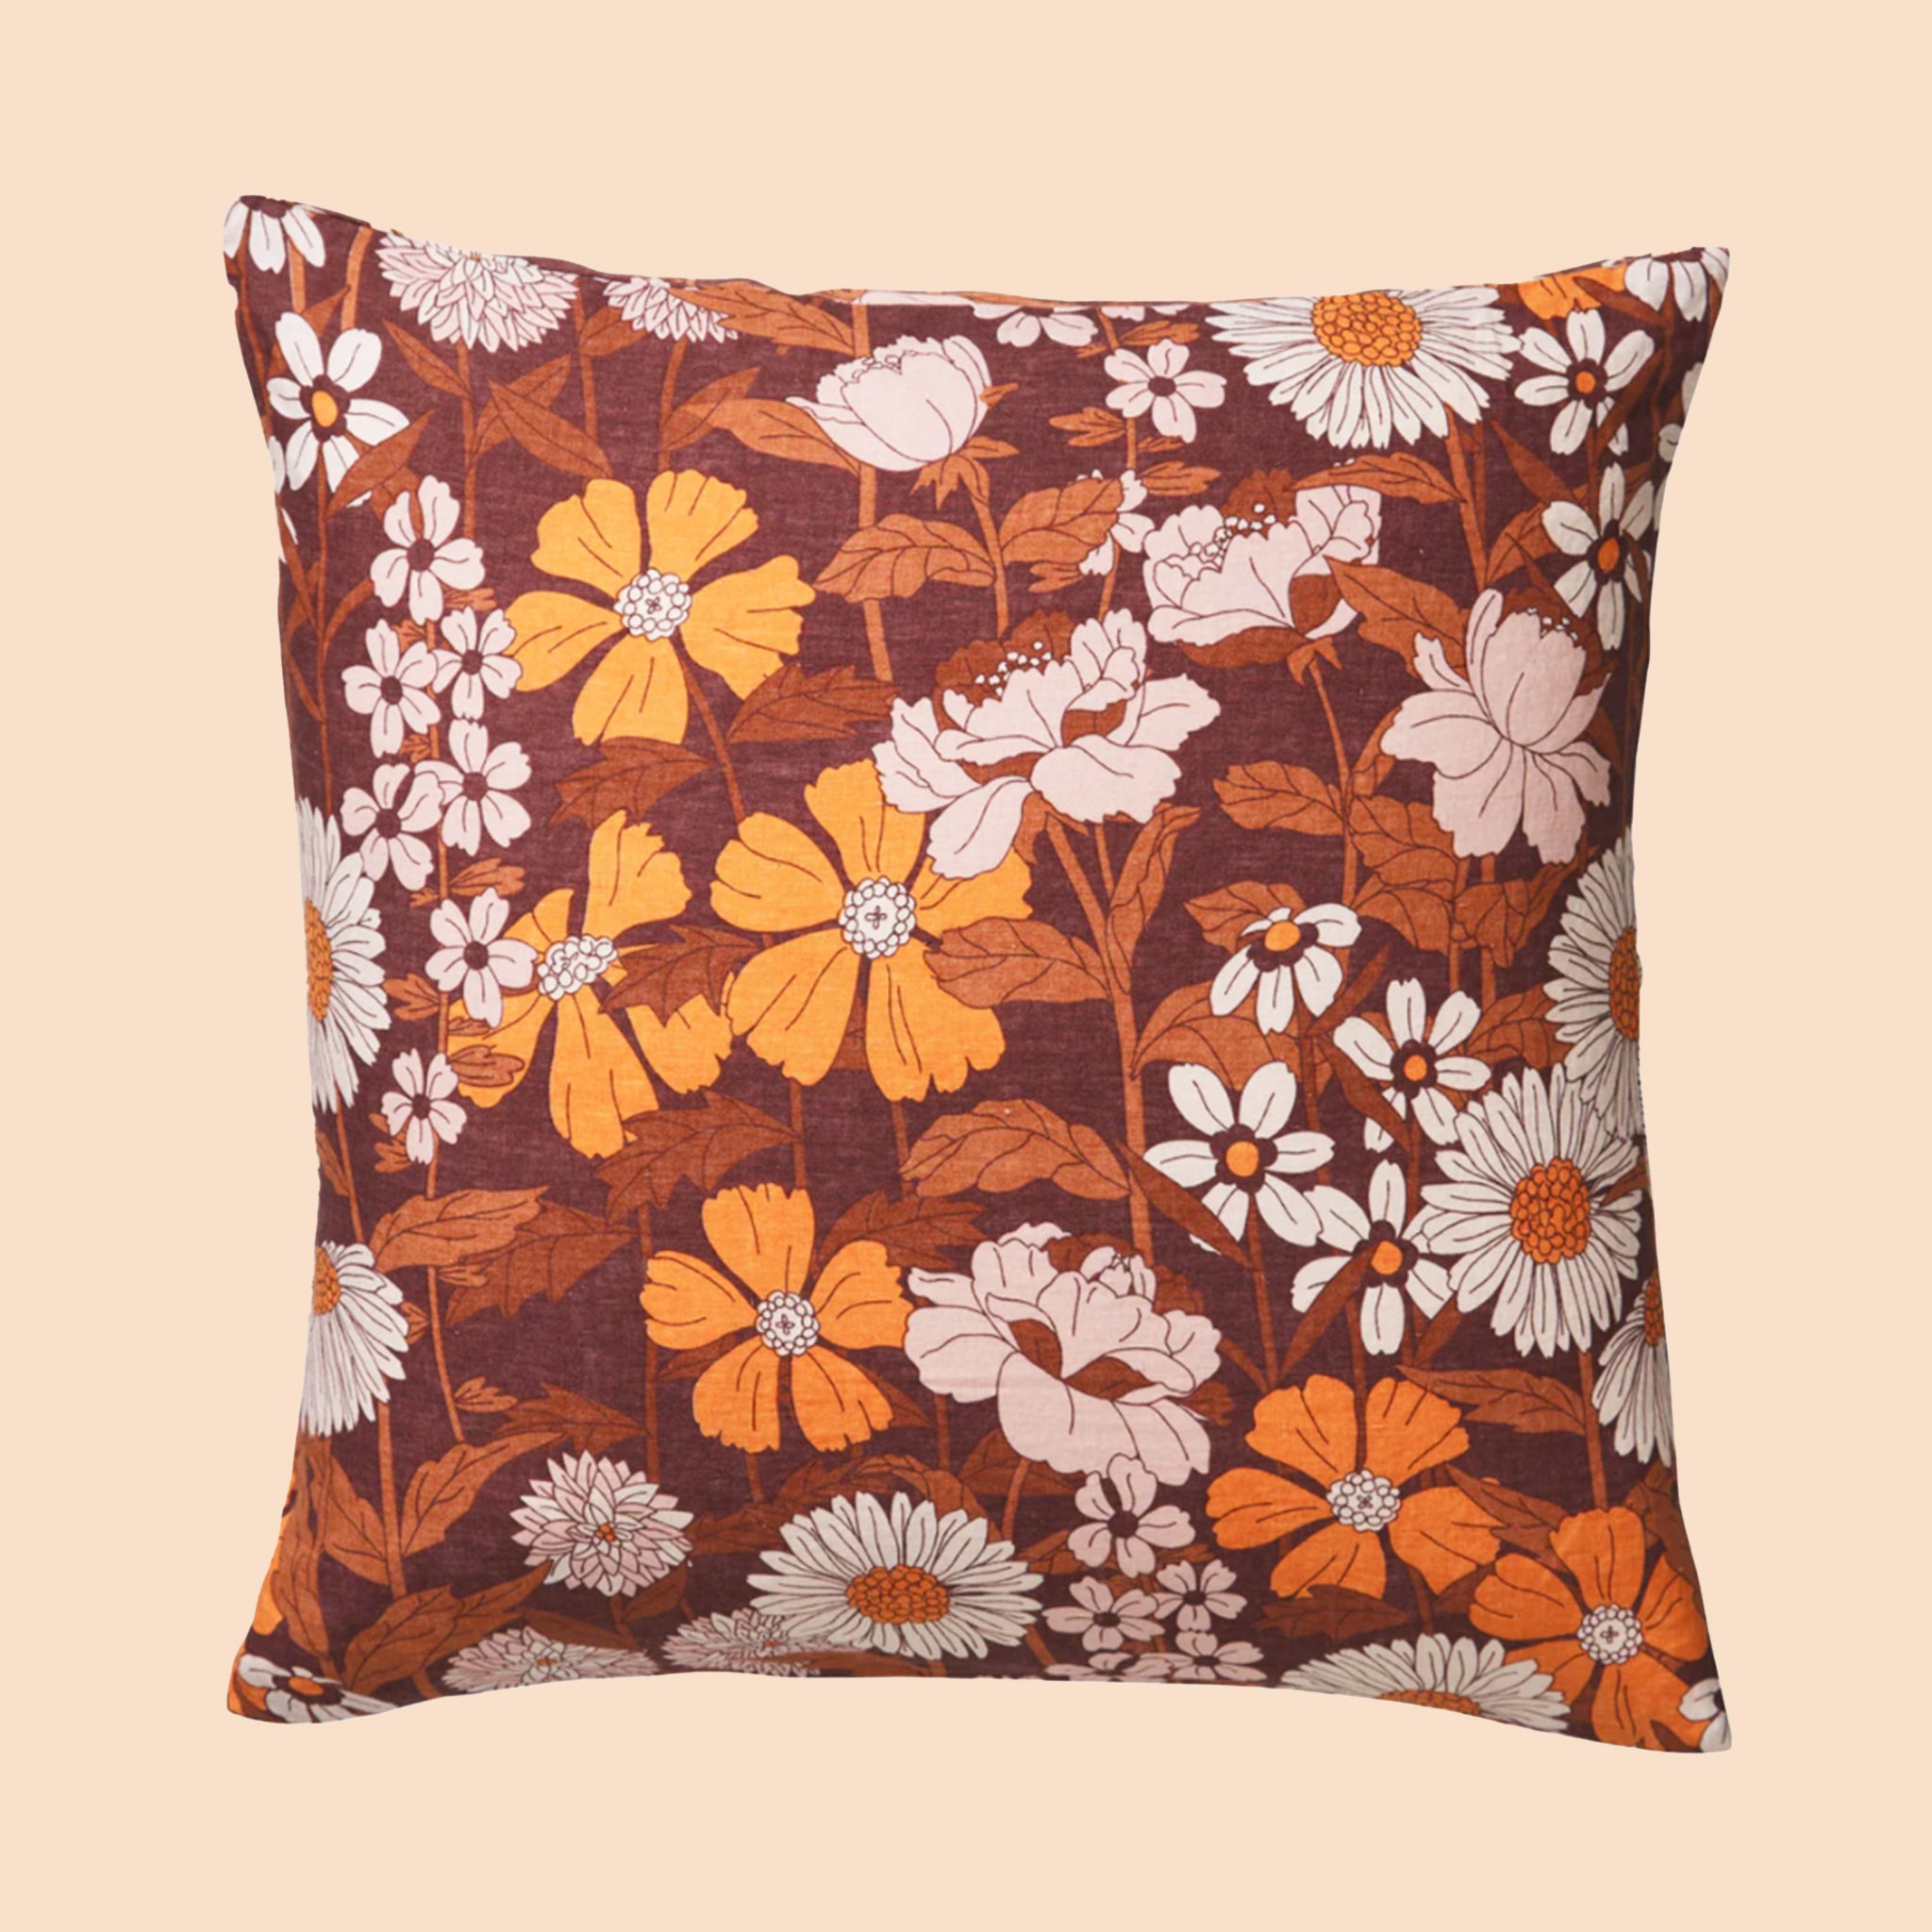 A euro pillowcase with a rust and orange floral print.